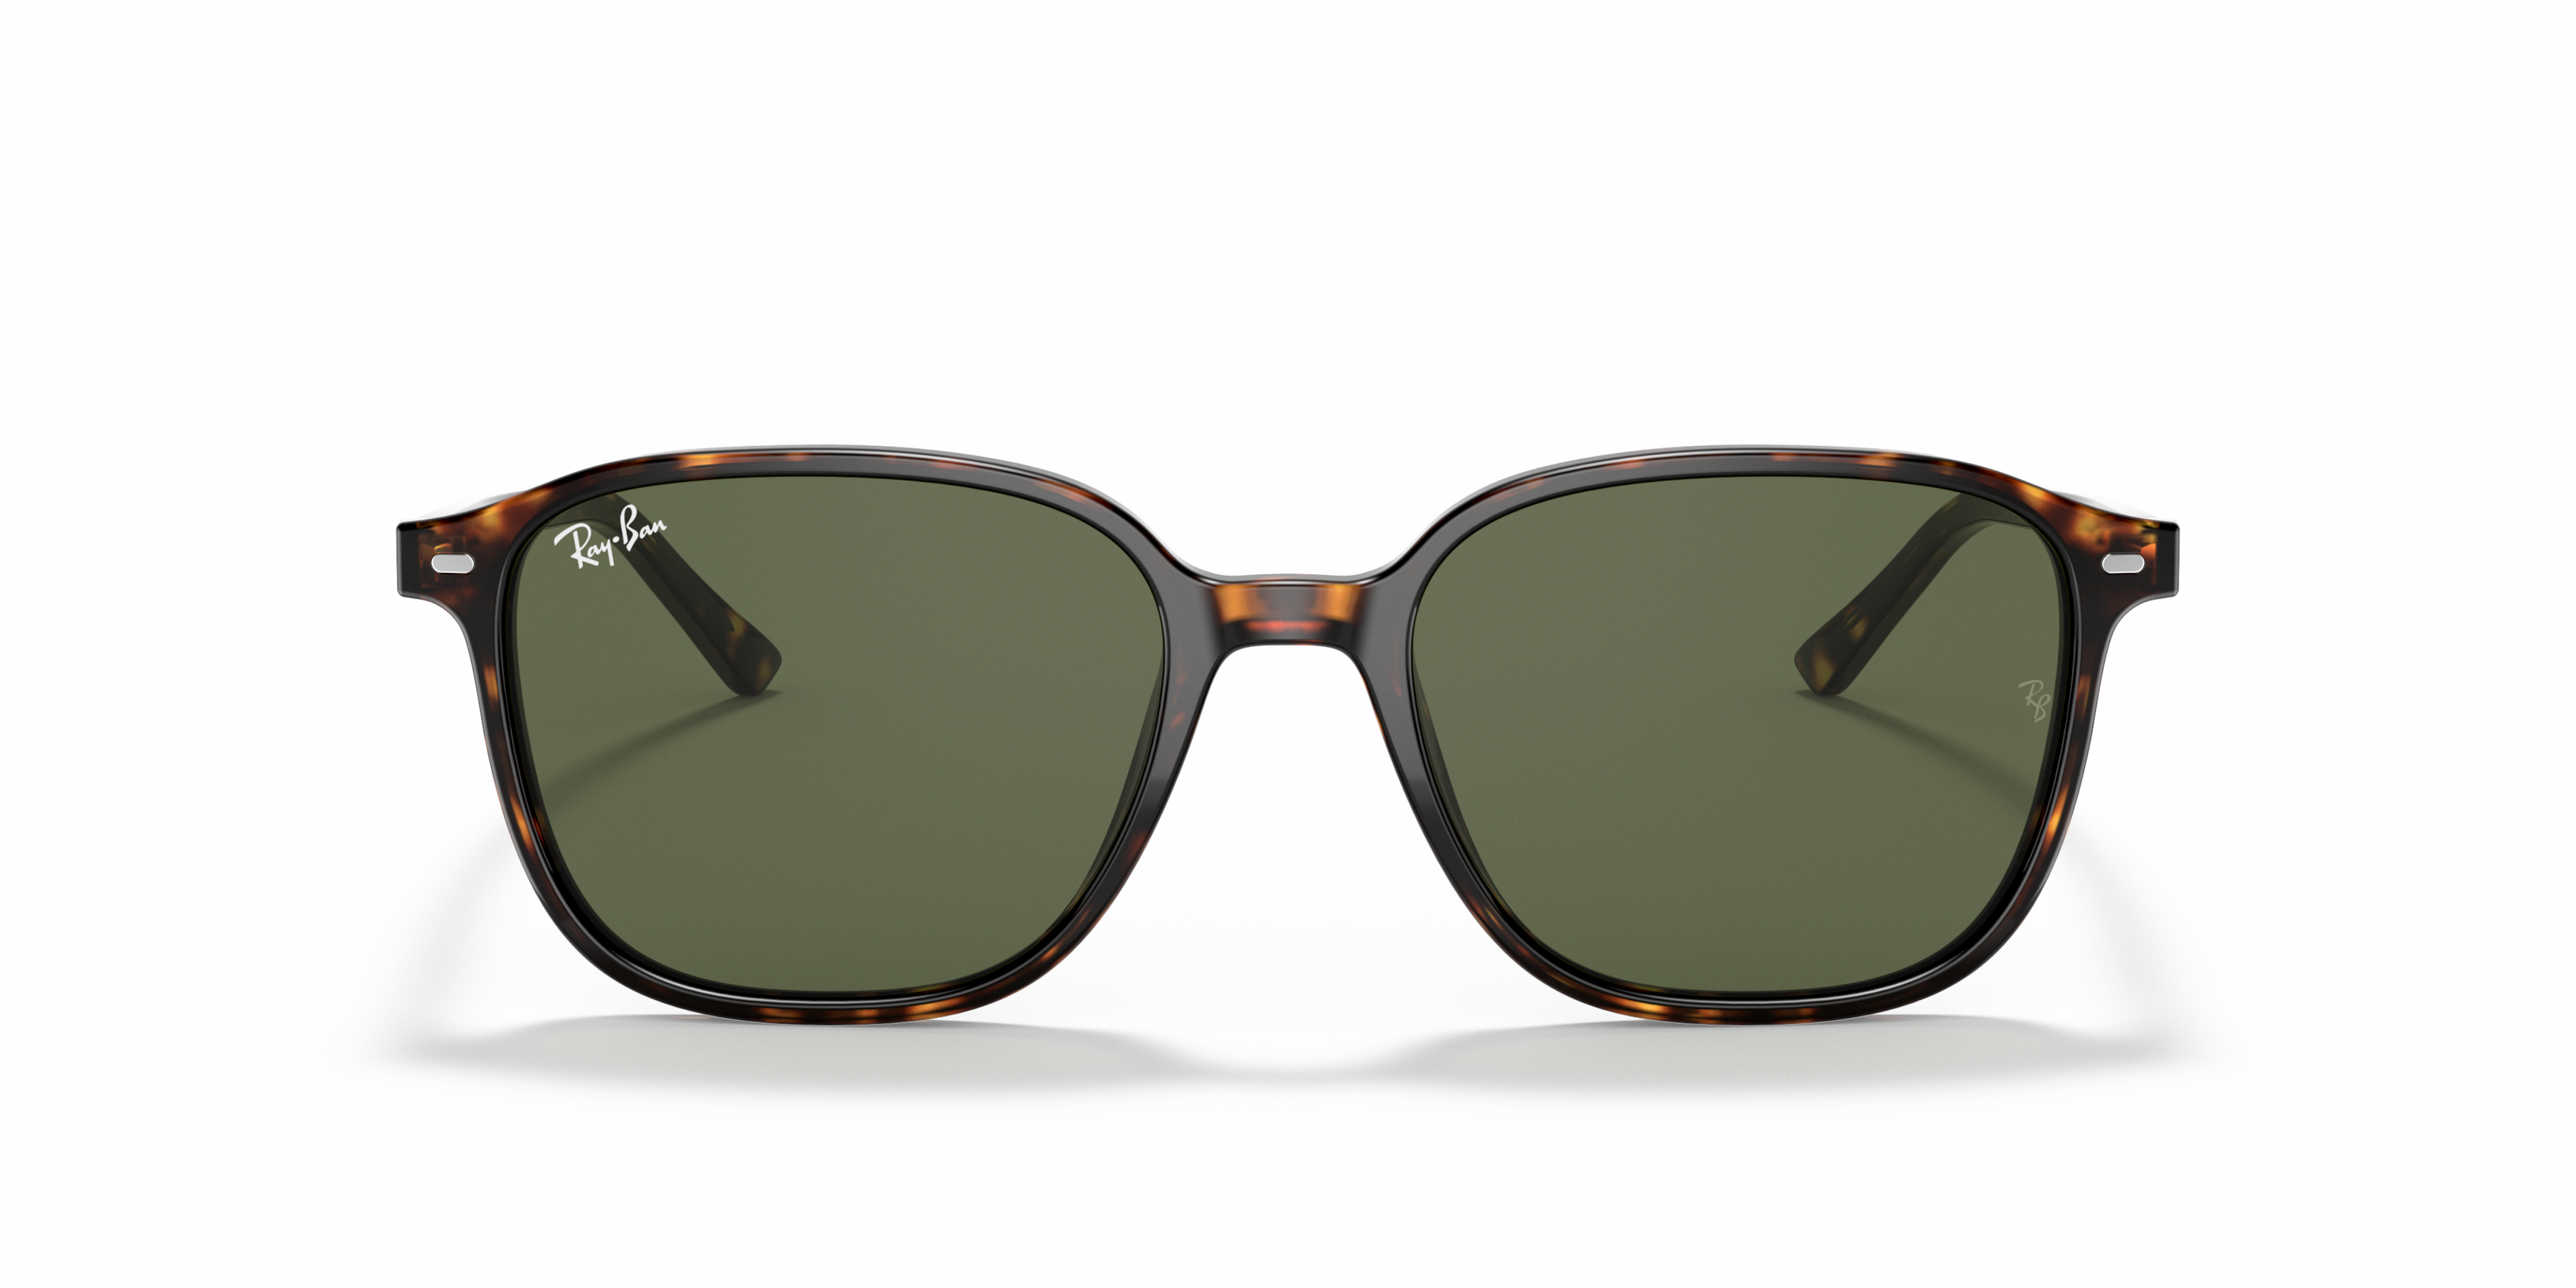 [products.image.front] RAY-BAN RB2193 902/31